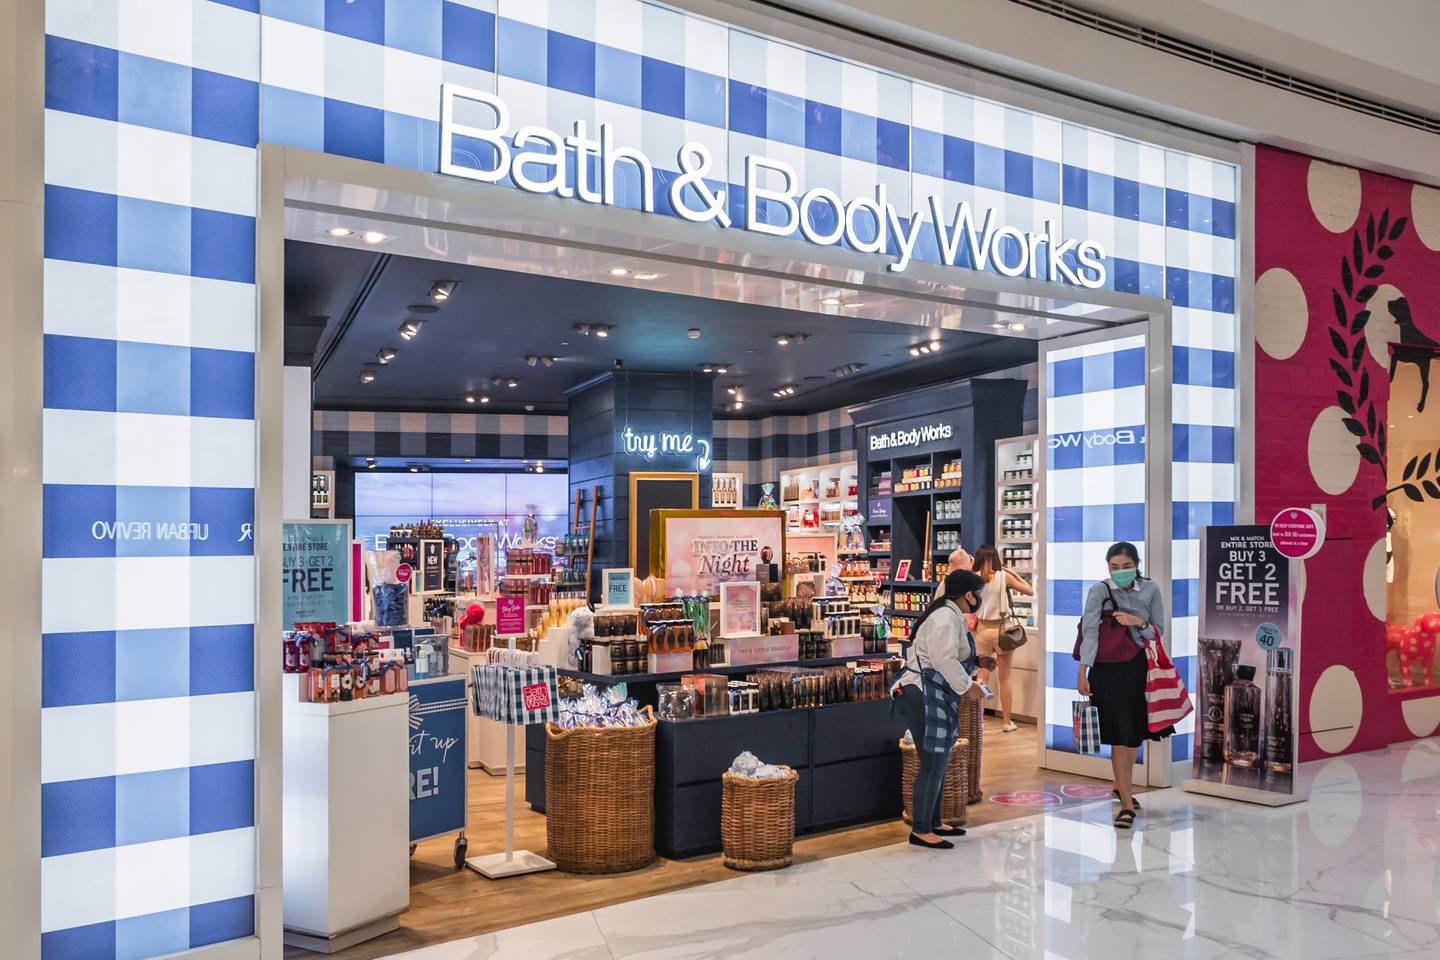 Bath and Body Works. Shutterstock.